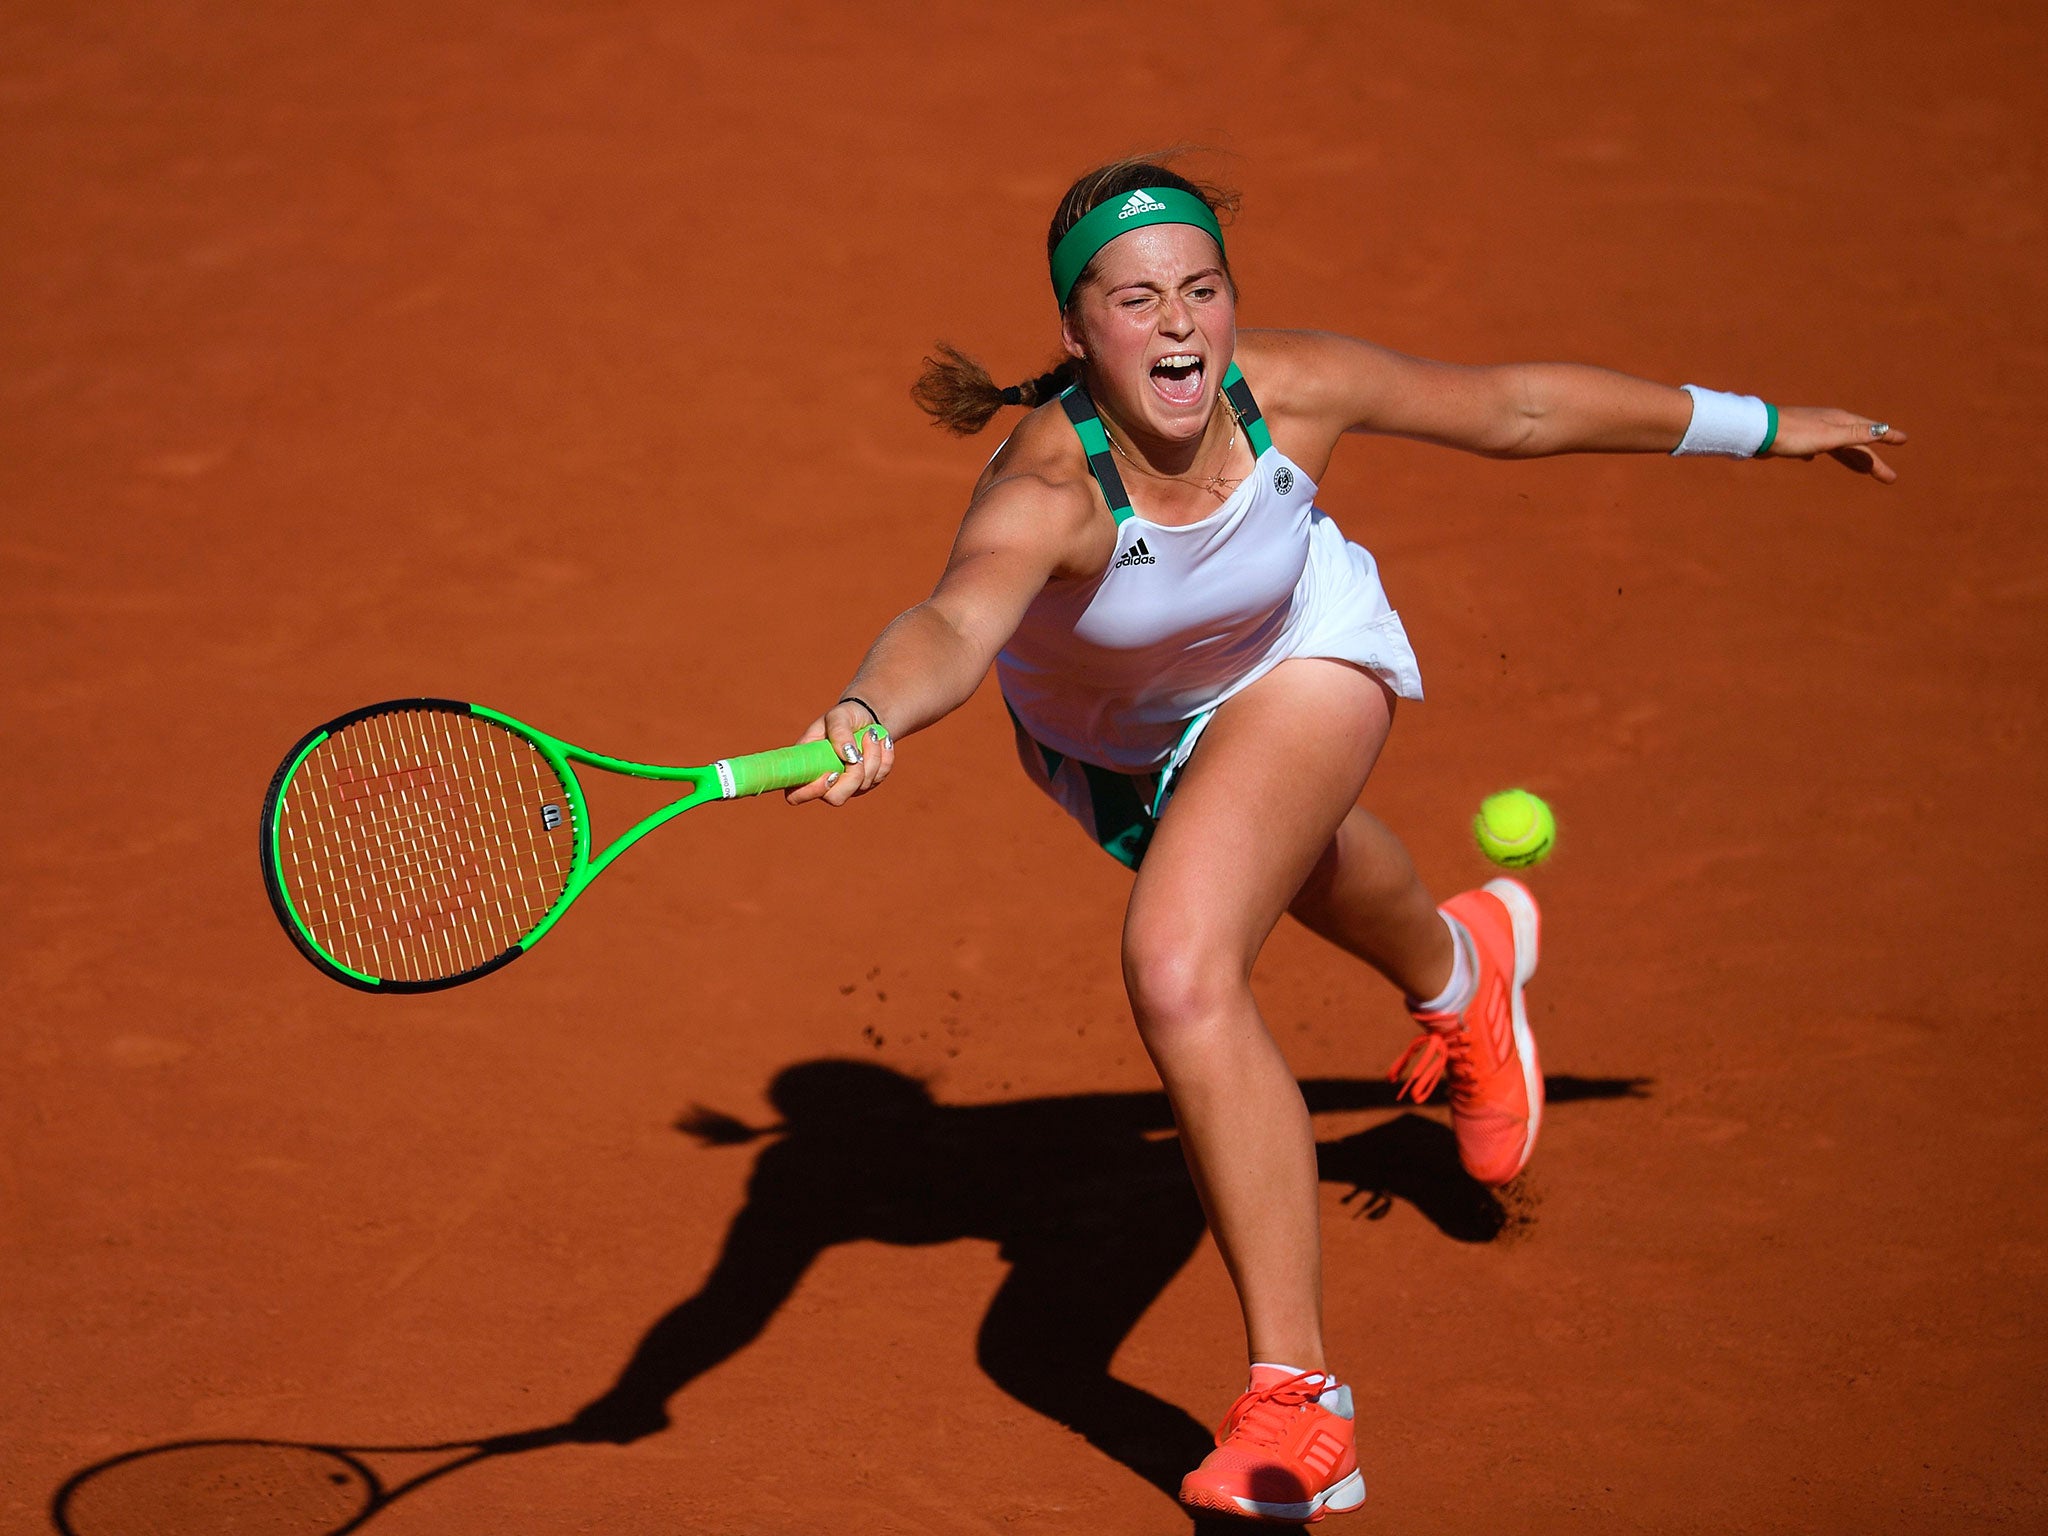 Jelena Ostapenko's forehand proved to be overwhelming at times